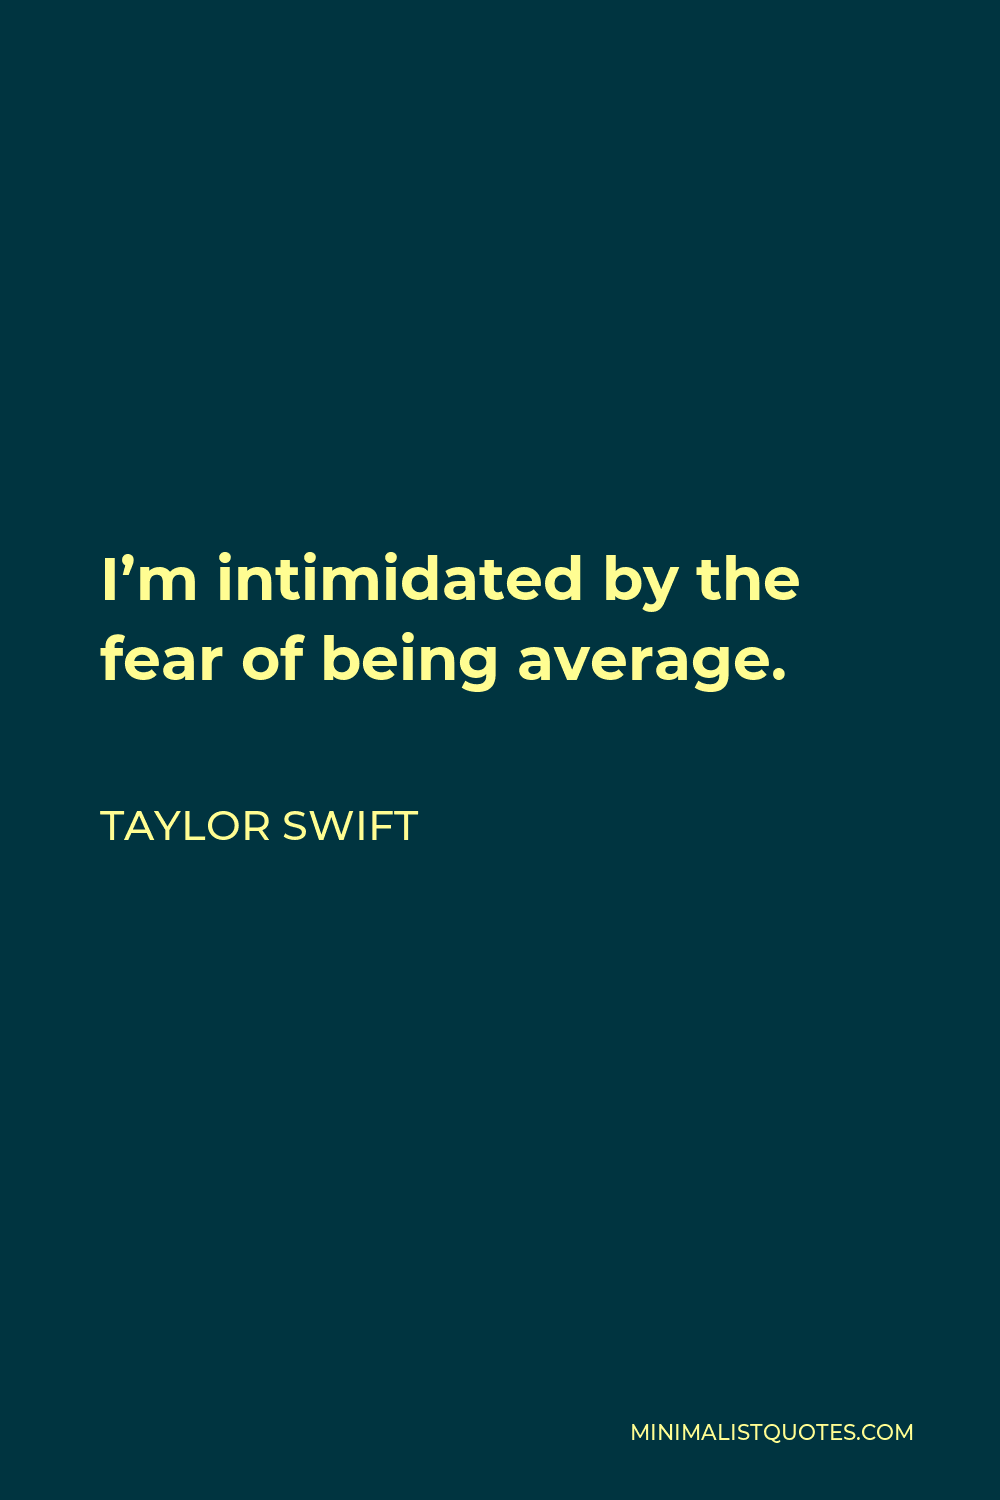 Taylor Swift Quote: I'm intimidated by the fear of being average.